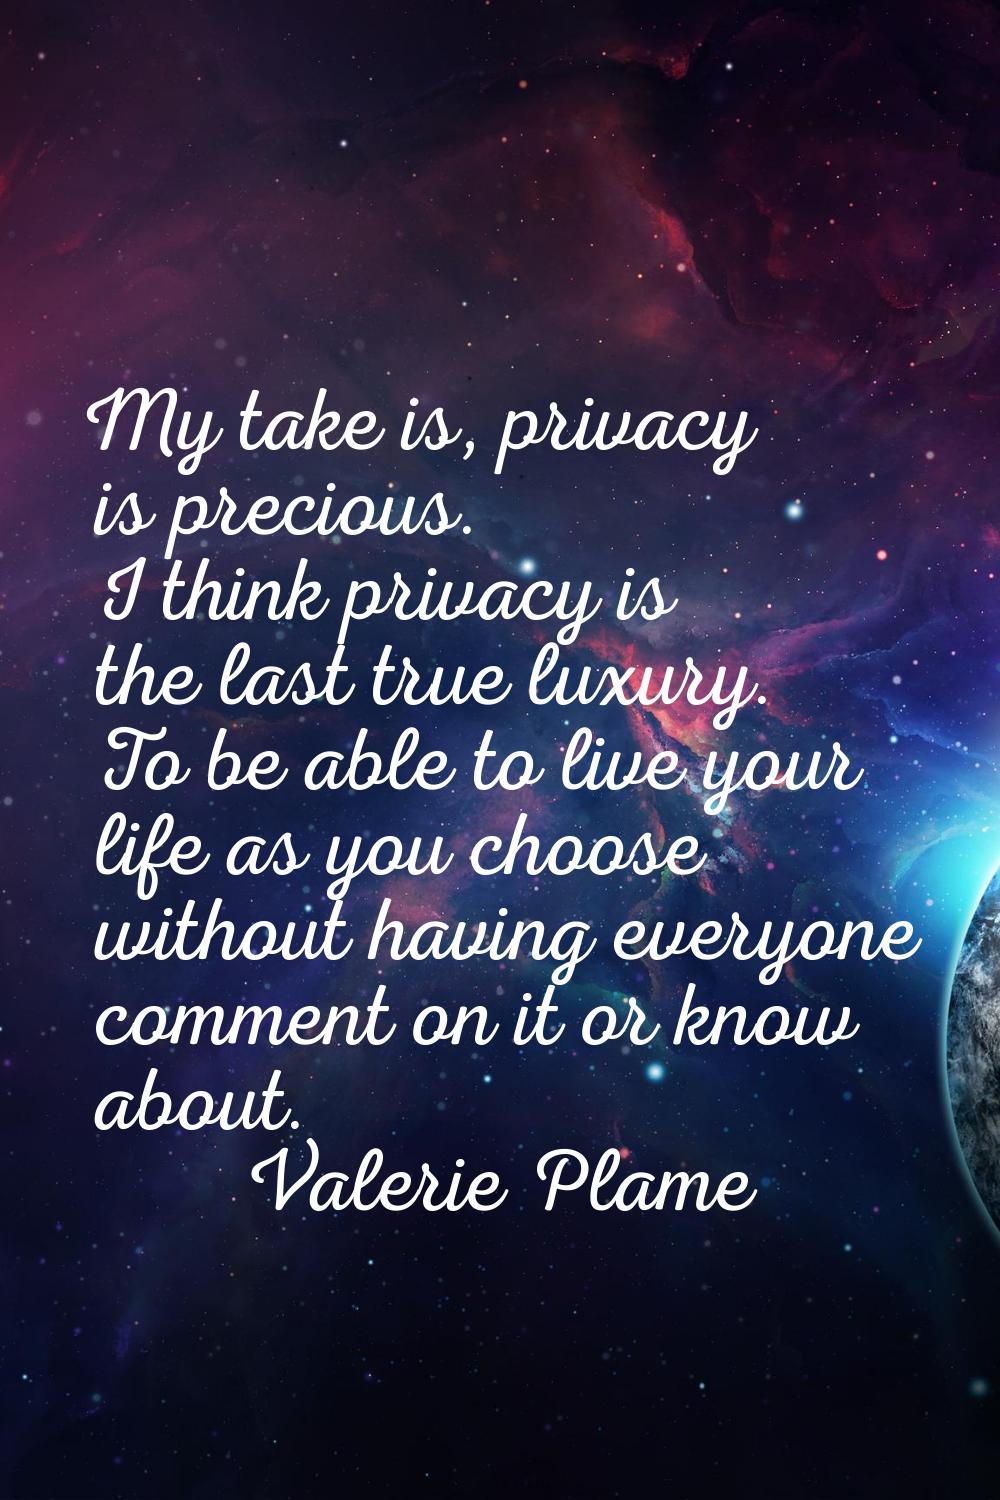 My take is, privacy is precious. I think privacy is the last true luxury. To be able to live your l